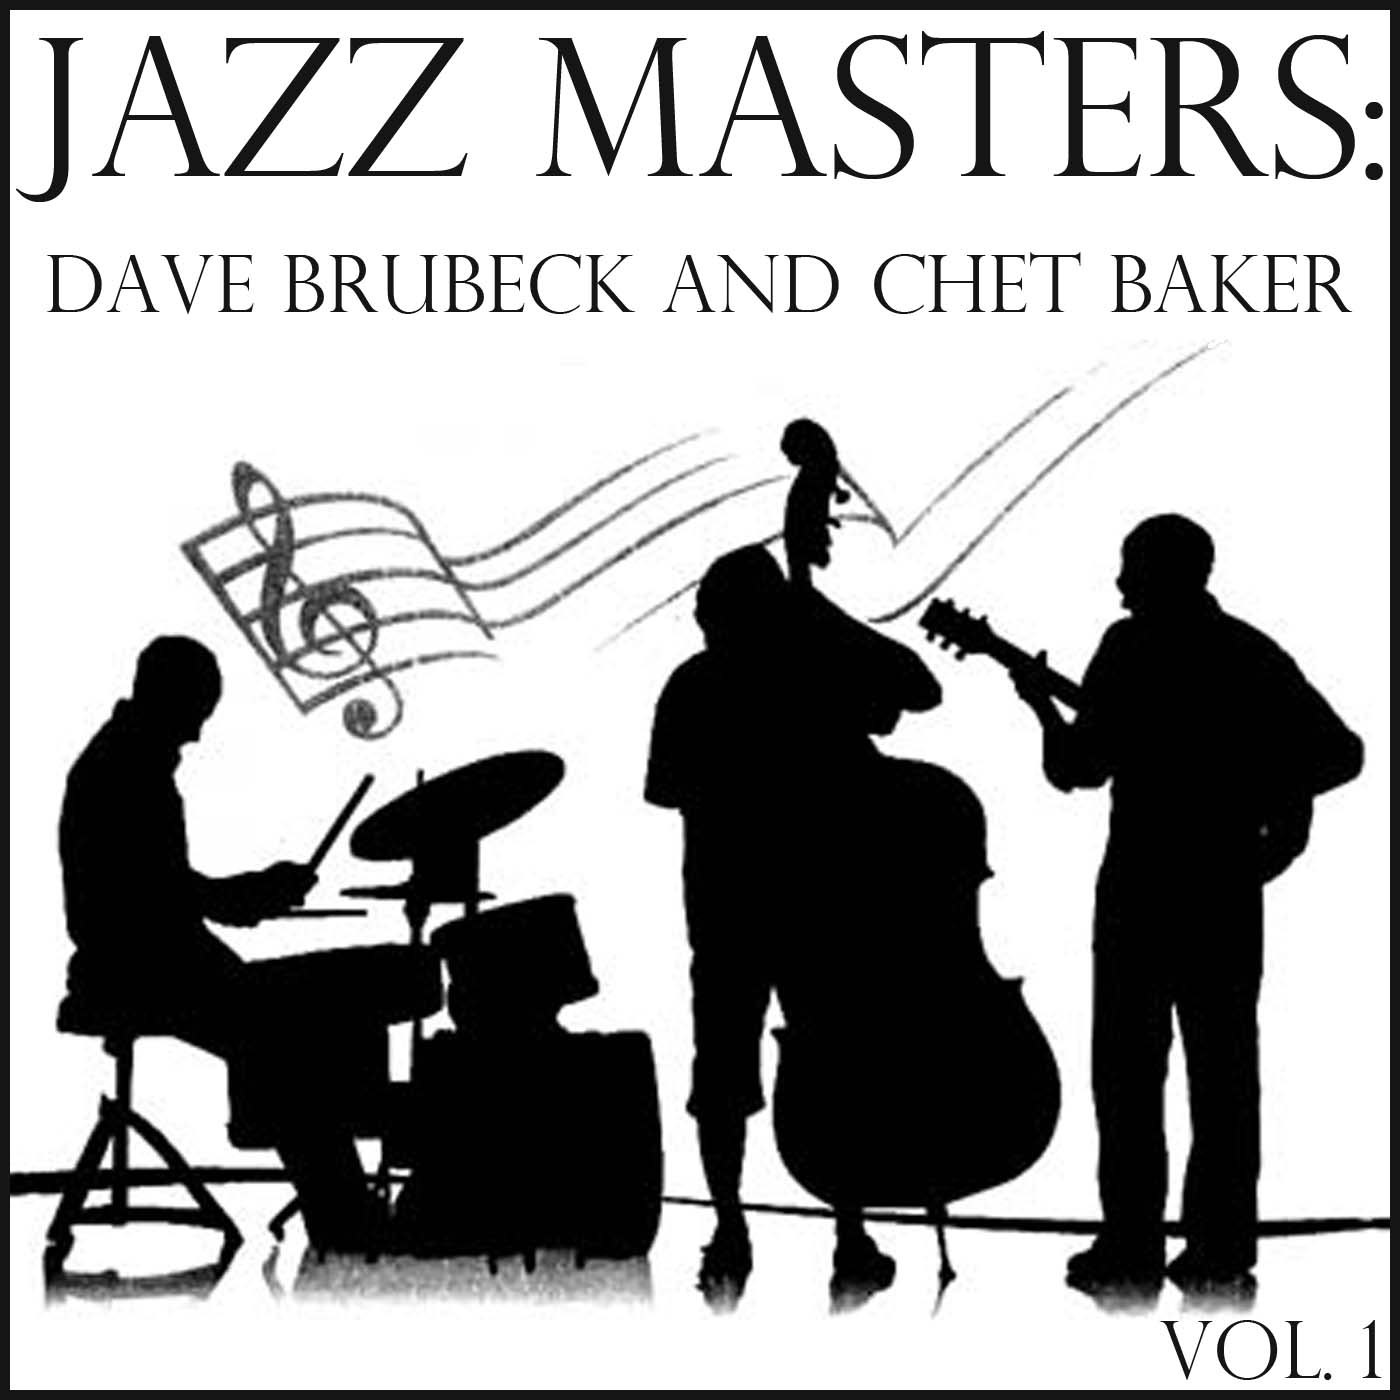 Jazz Masters: Dave Brubeck and Chet Baker, Vol. 1